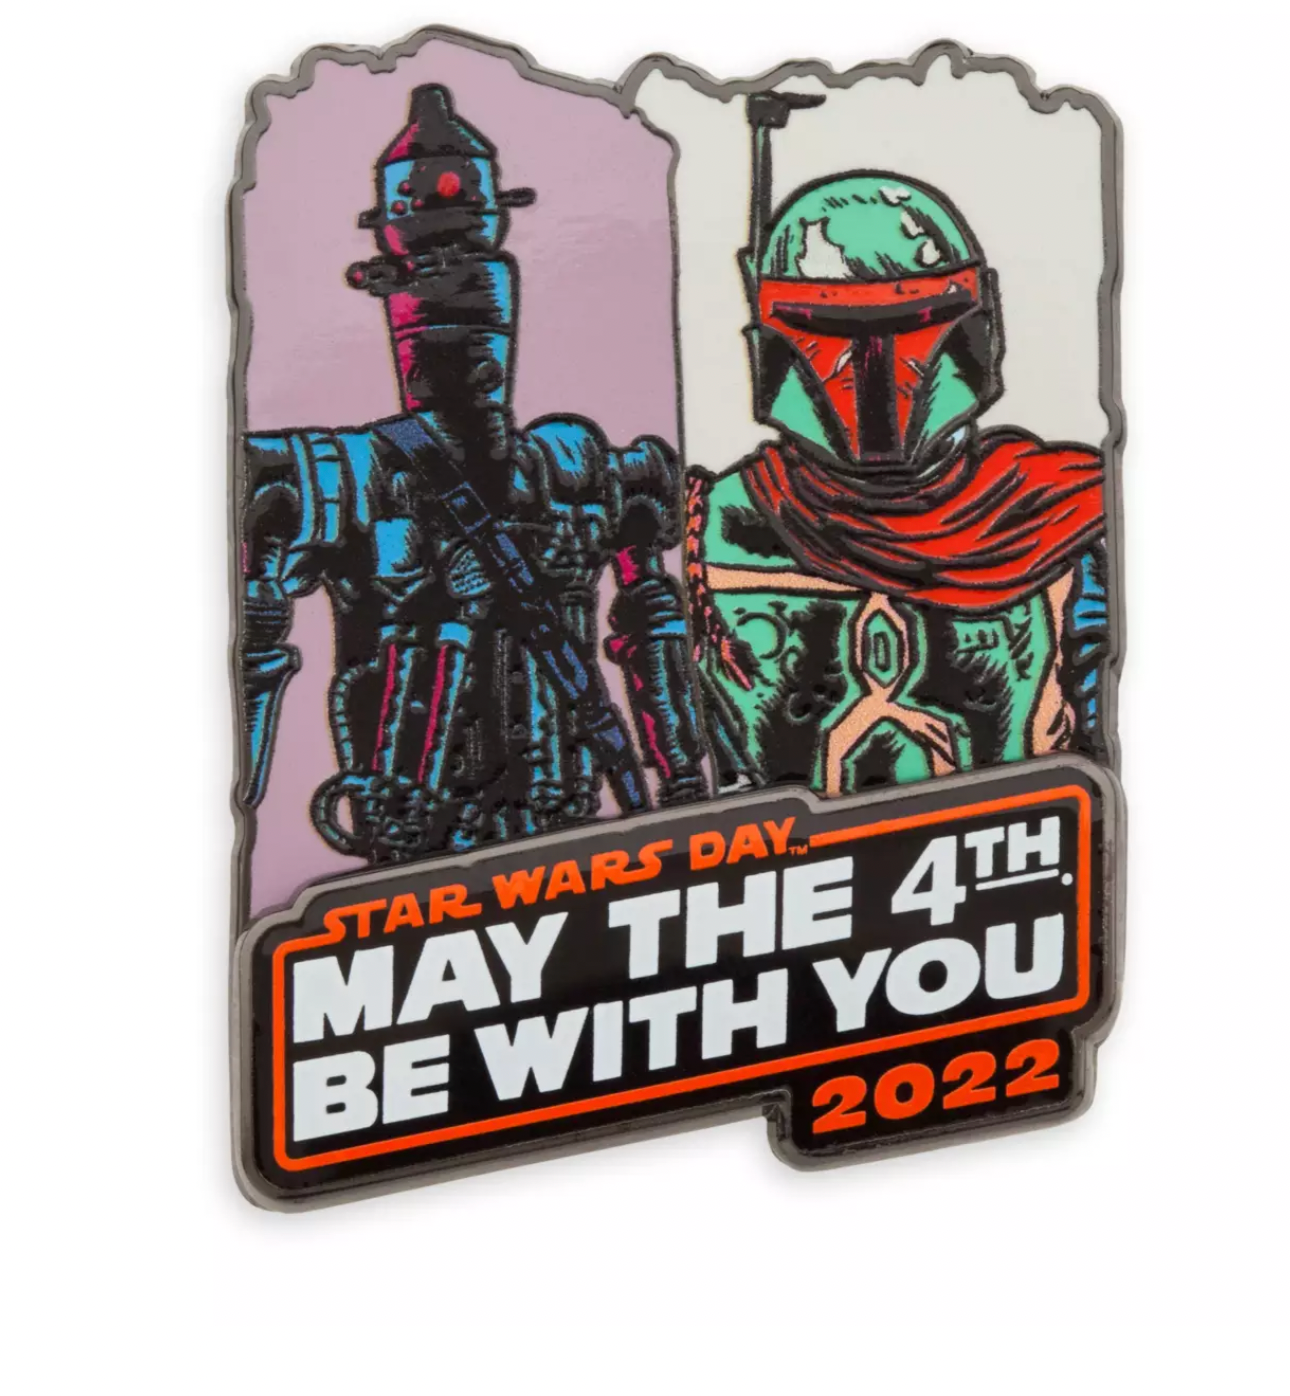 Disney Star Wars May the 4th Be With You 2022 Boba Fett IG-88 Pin Limited New